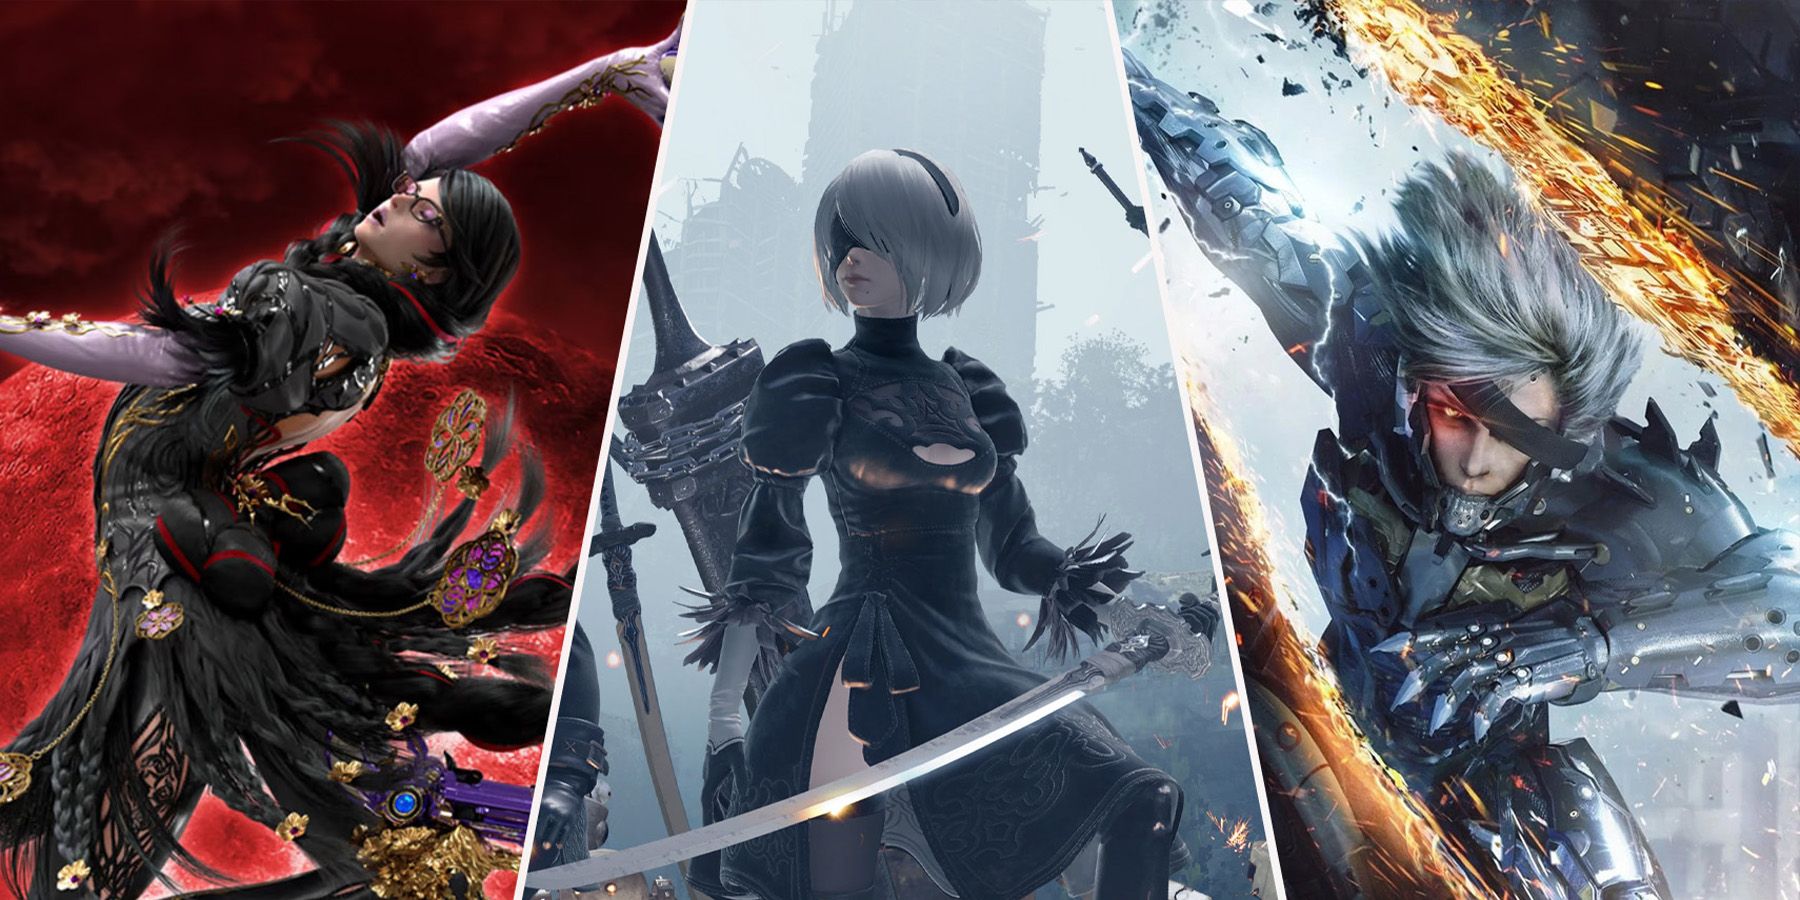 The 10 Best PlatinumGames Games, Ranked (According To Metacritic)